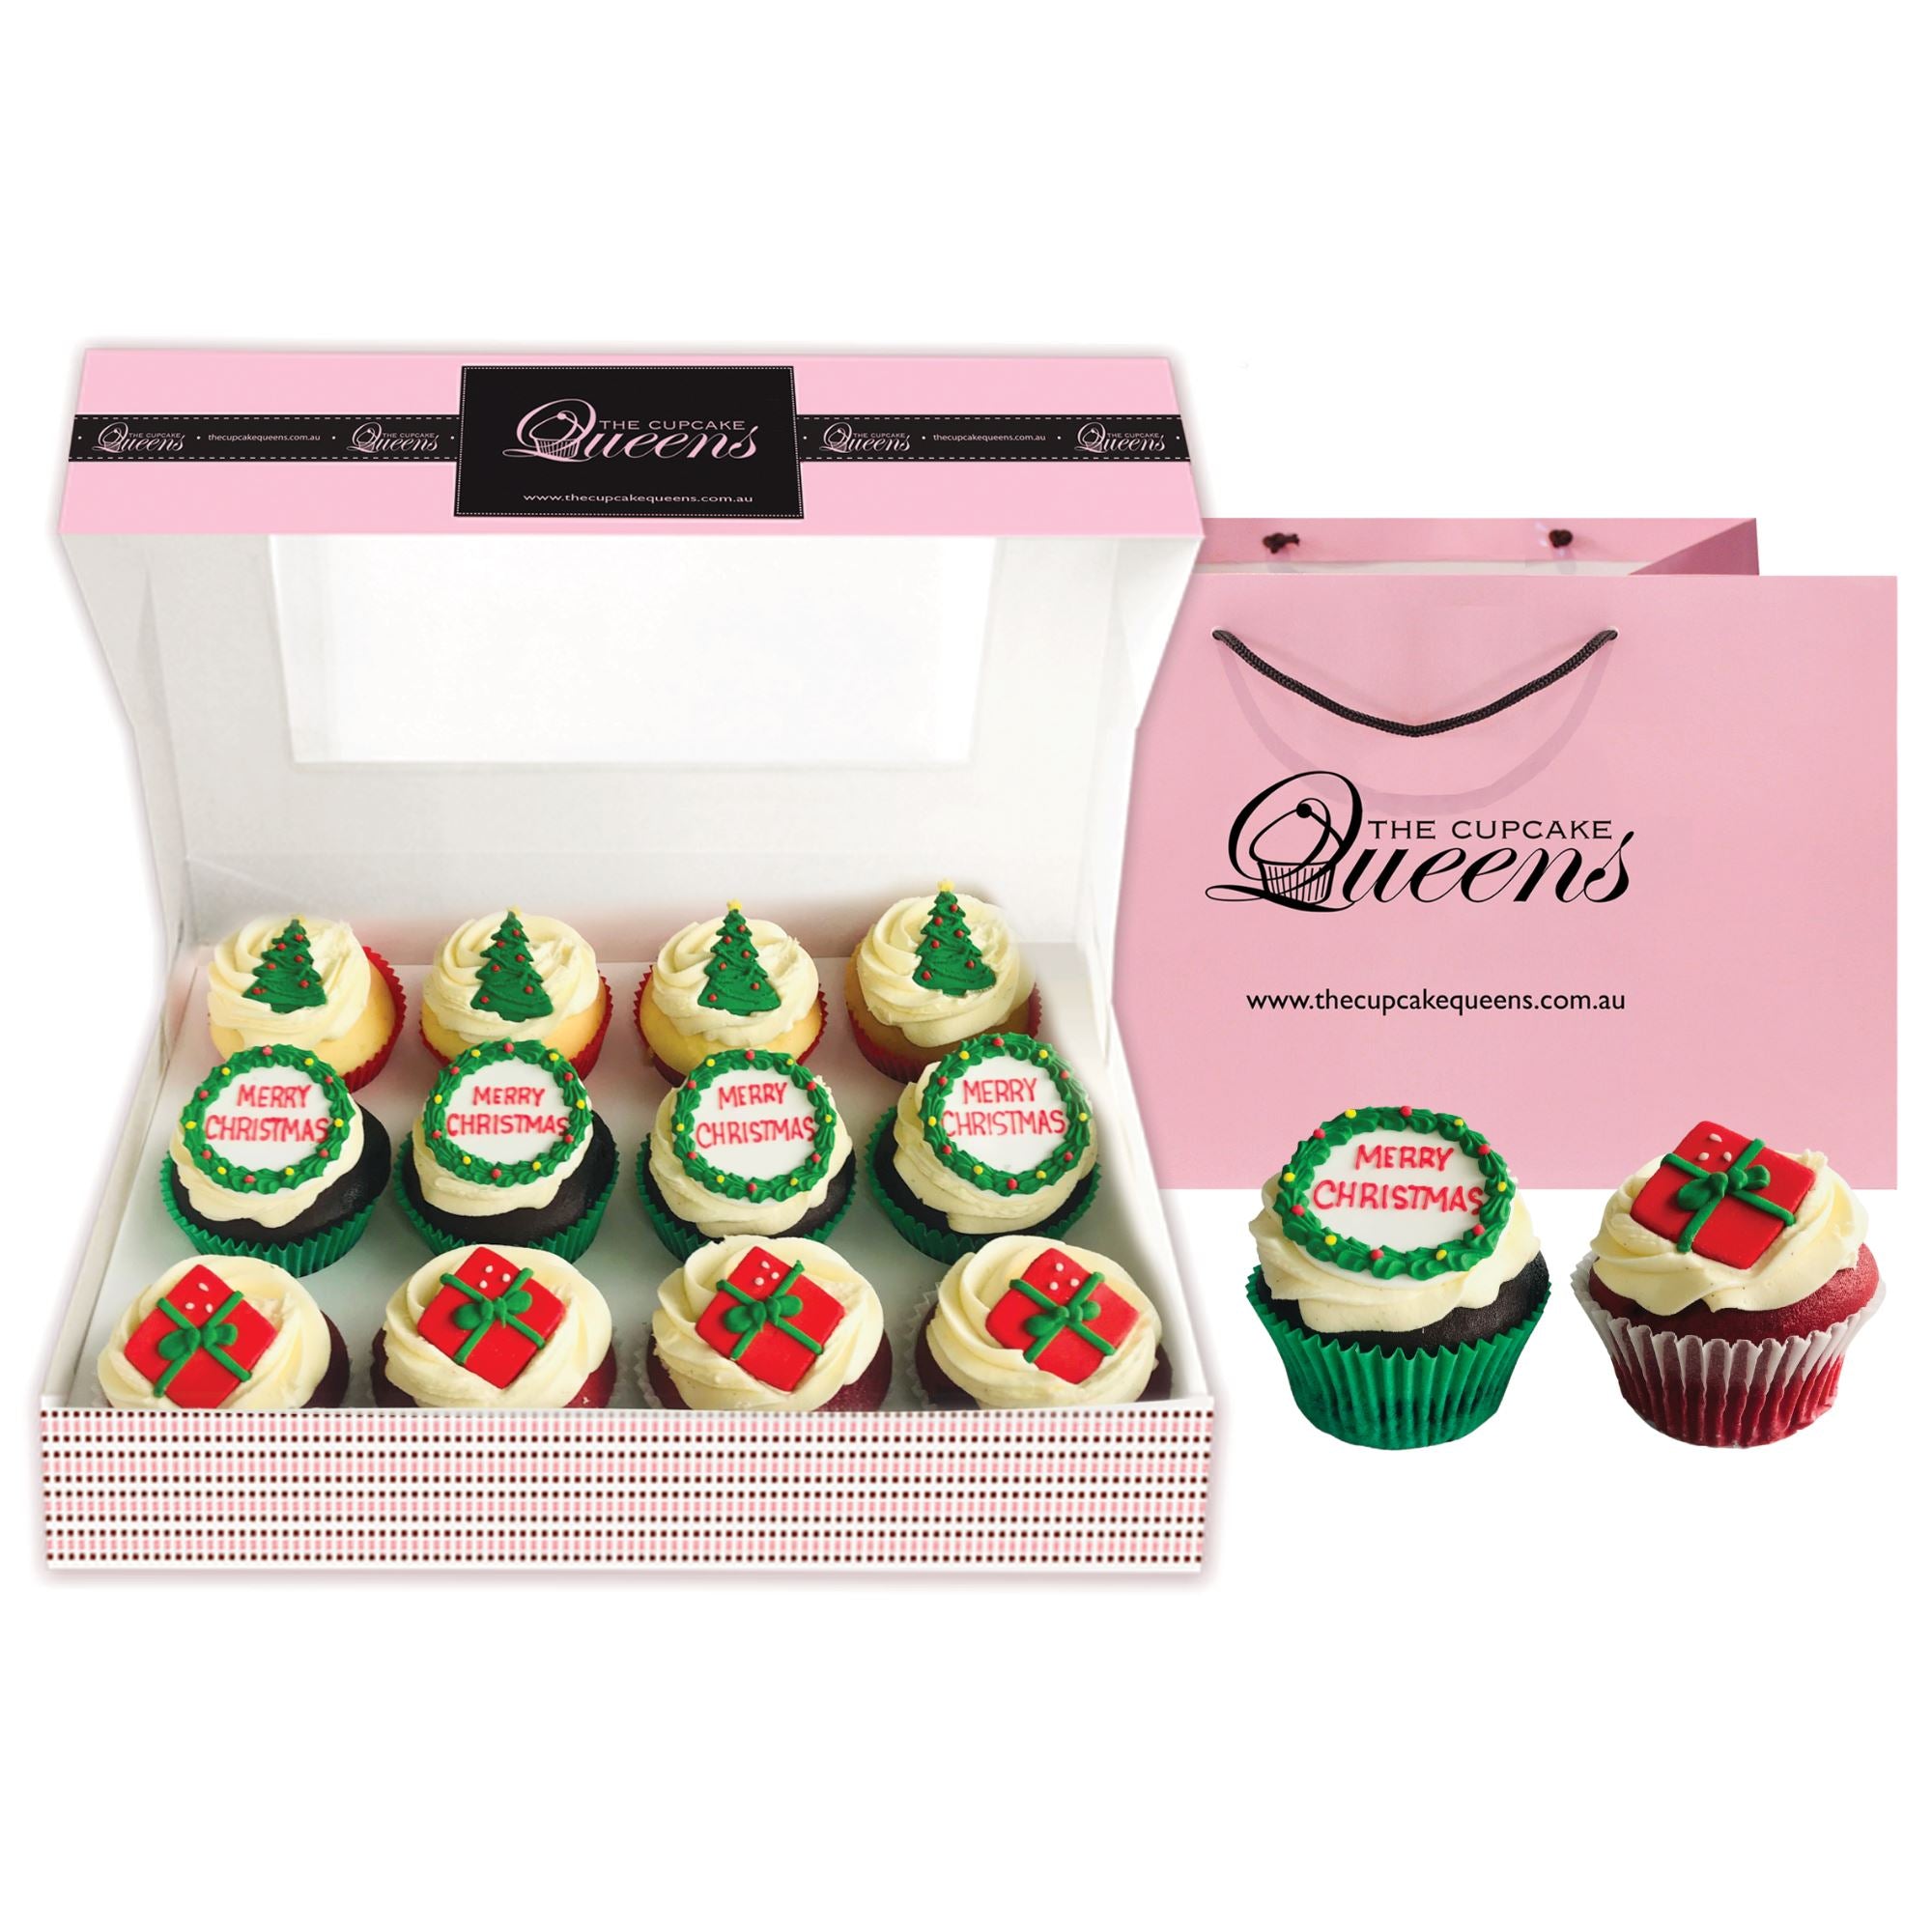 Merry Christmas Gift box Cupcakes Pre Selected Boxes The Cupcake Queens 